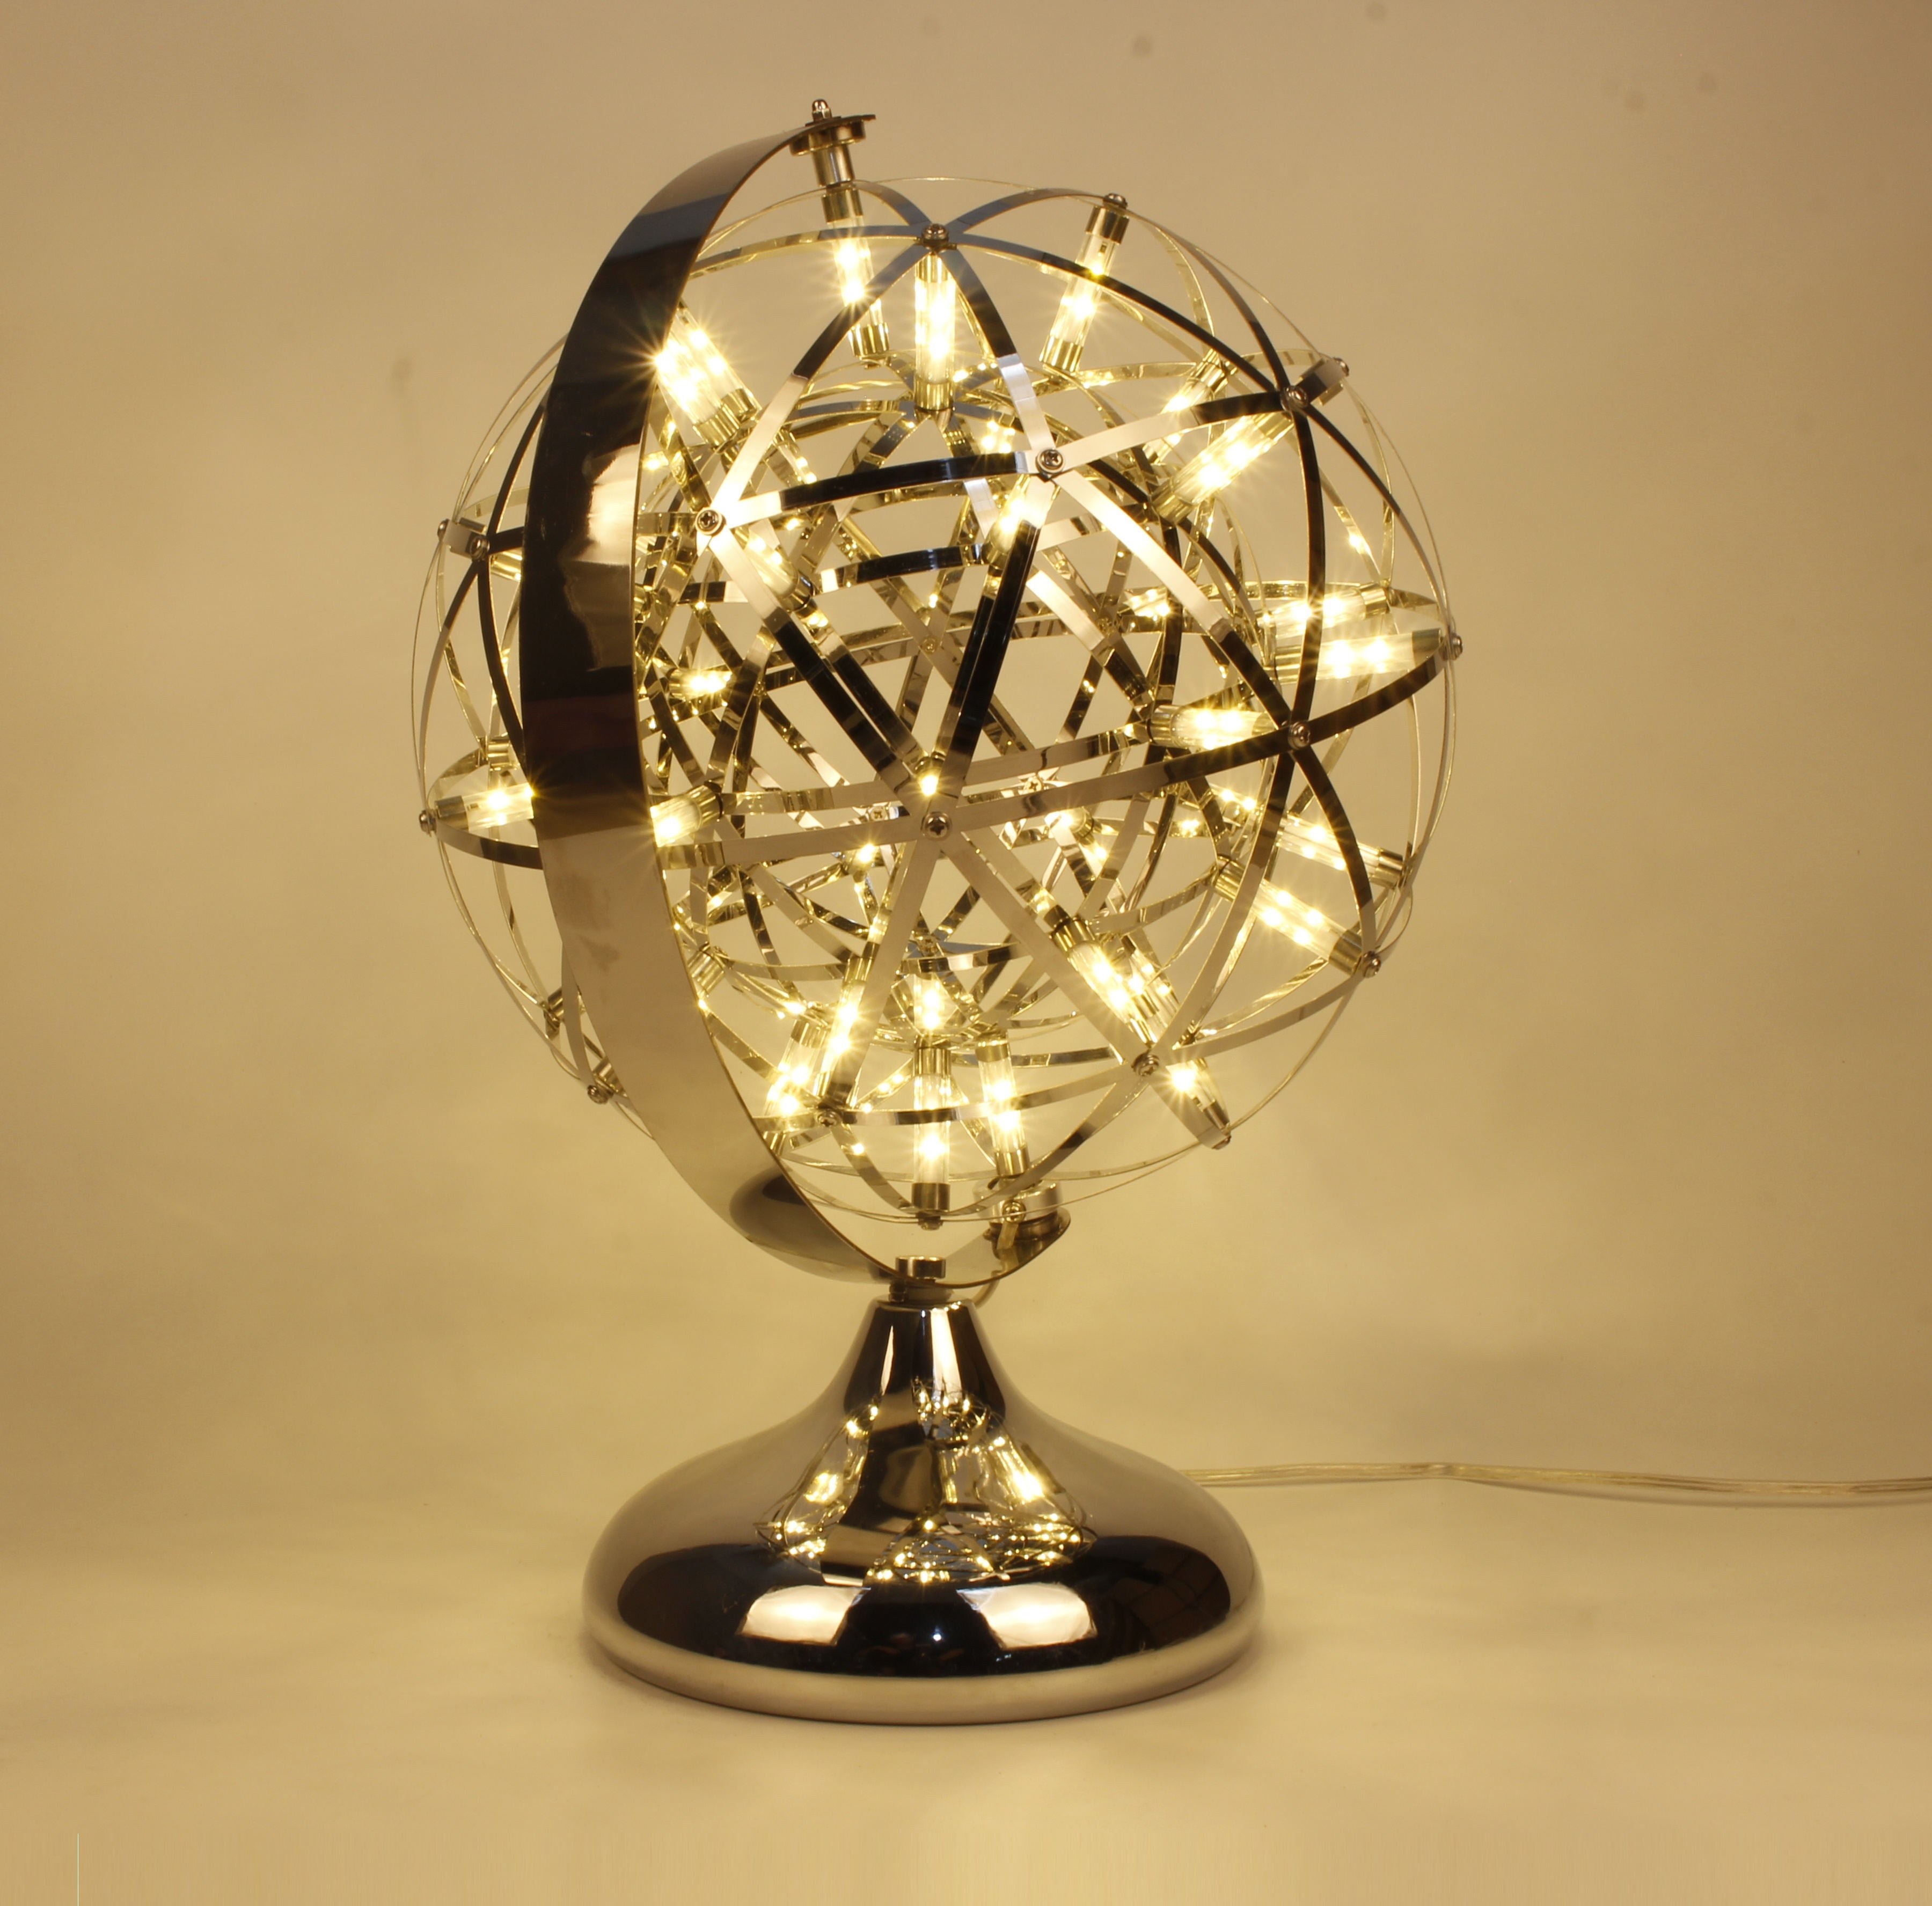 Stainless Steel Ambience Decorative Table Lamp